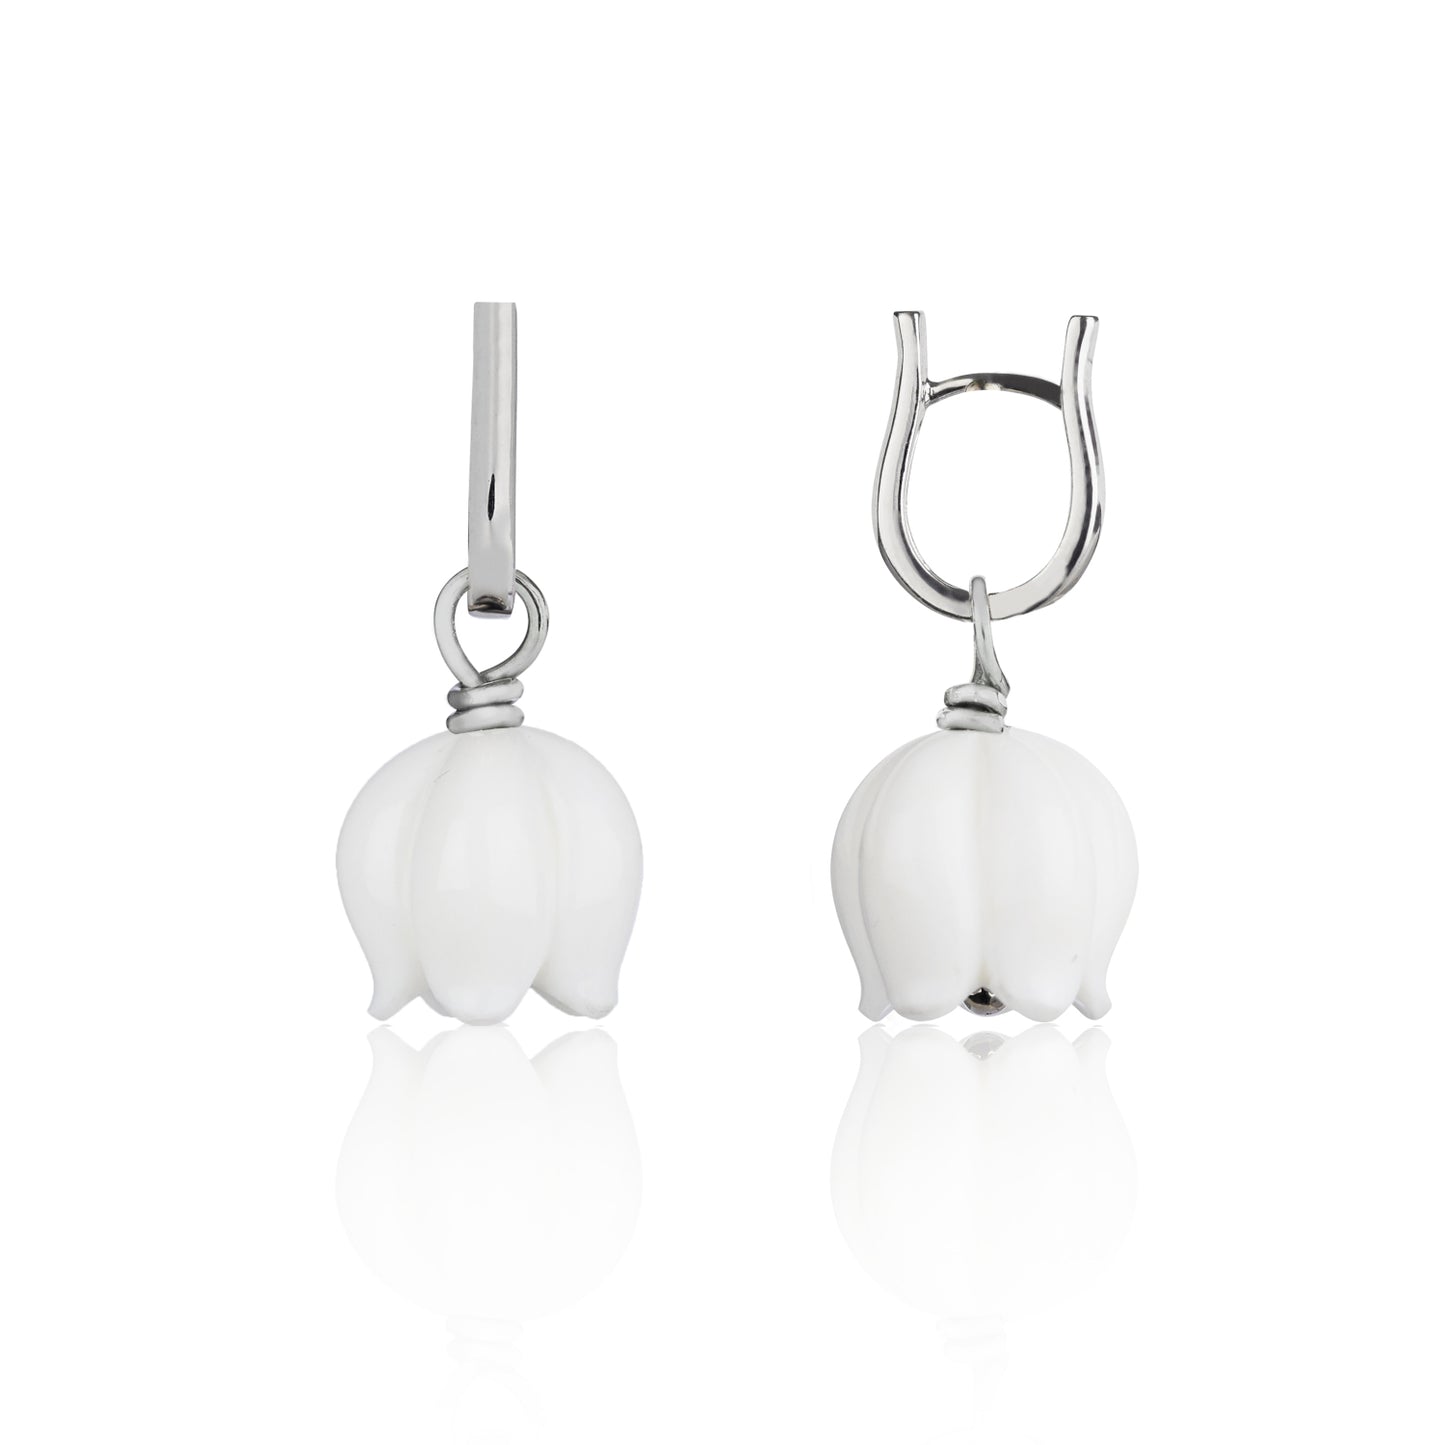 18ct White Gold and White Opal Bellflower Loop Earrings side view by McFarlane Fine Jewellery